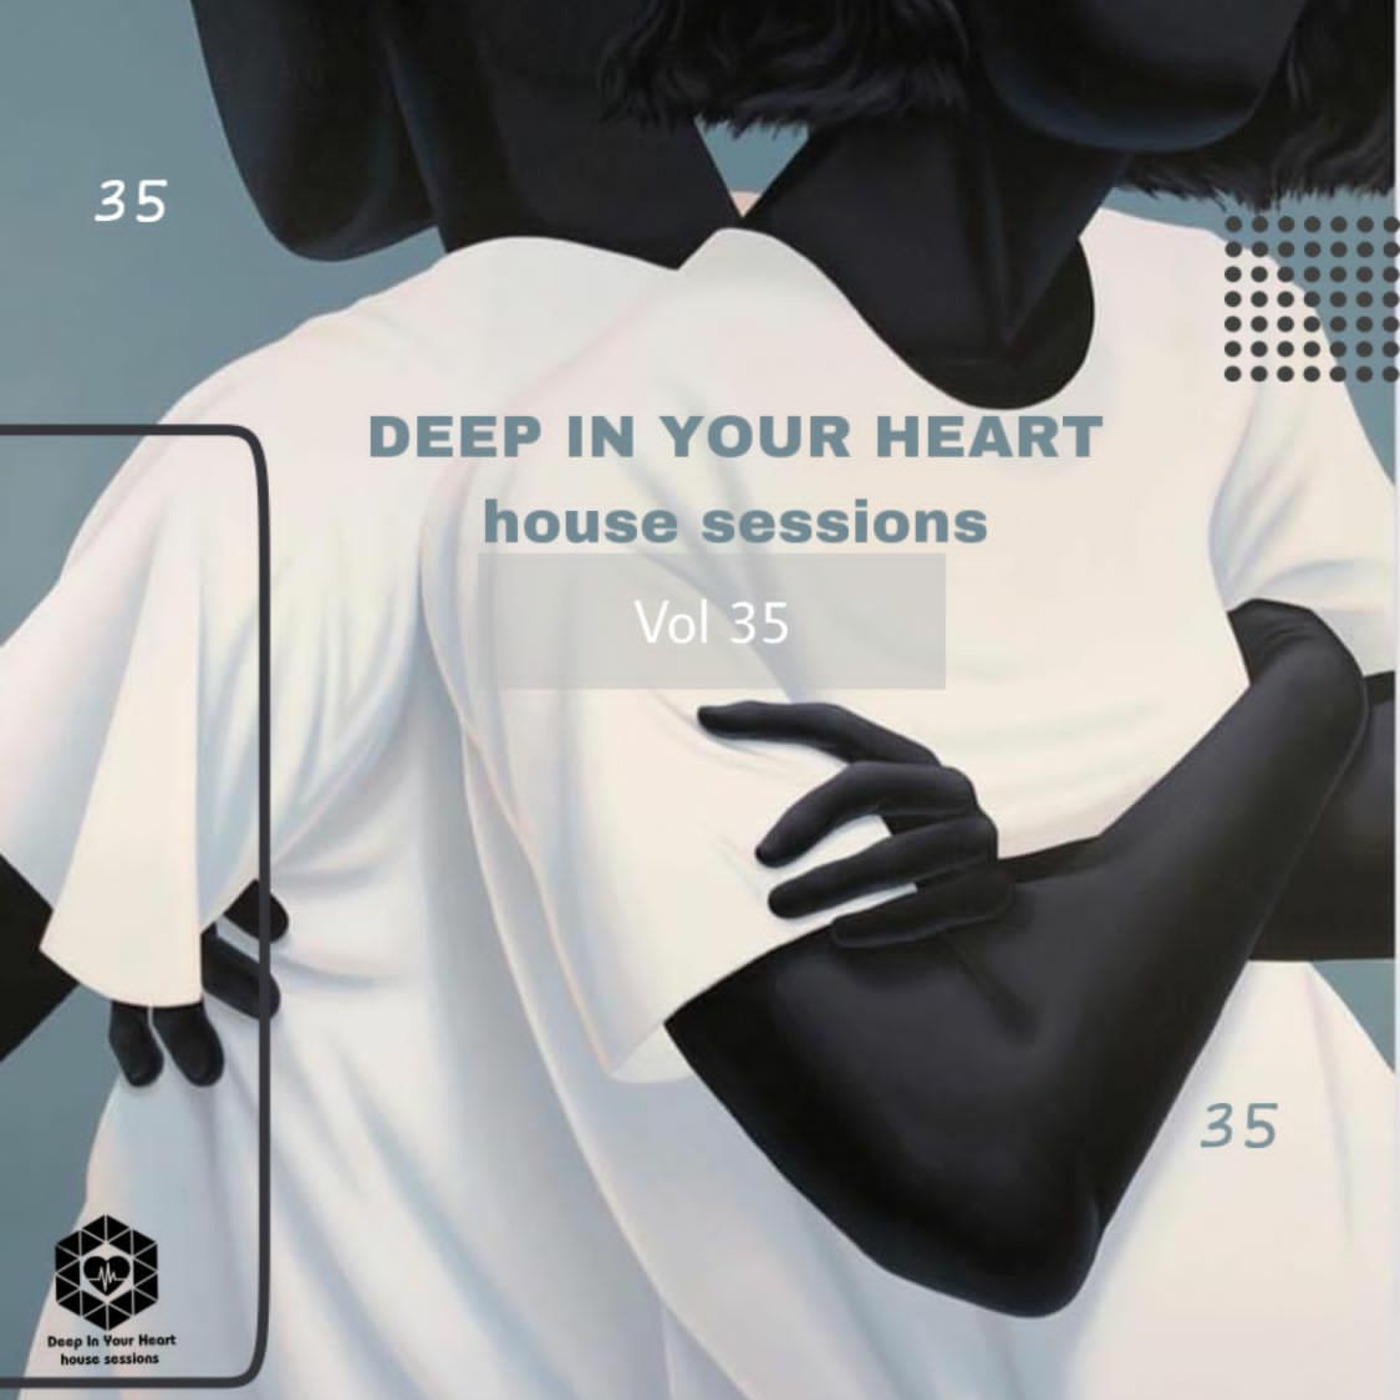 DEEP IN YOUR HEART house sessions vol 35 mixed by Clektor Zway & Denilson Mokoena (7)